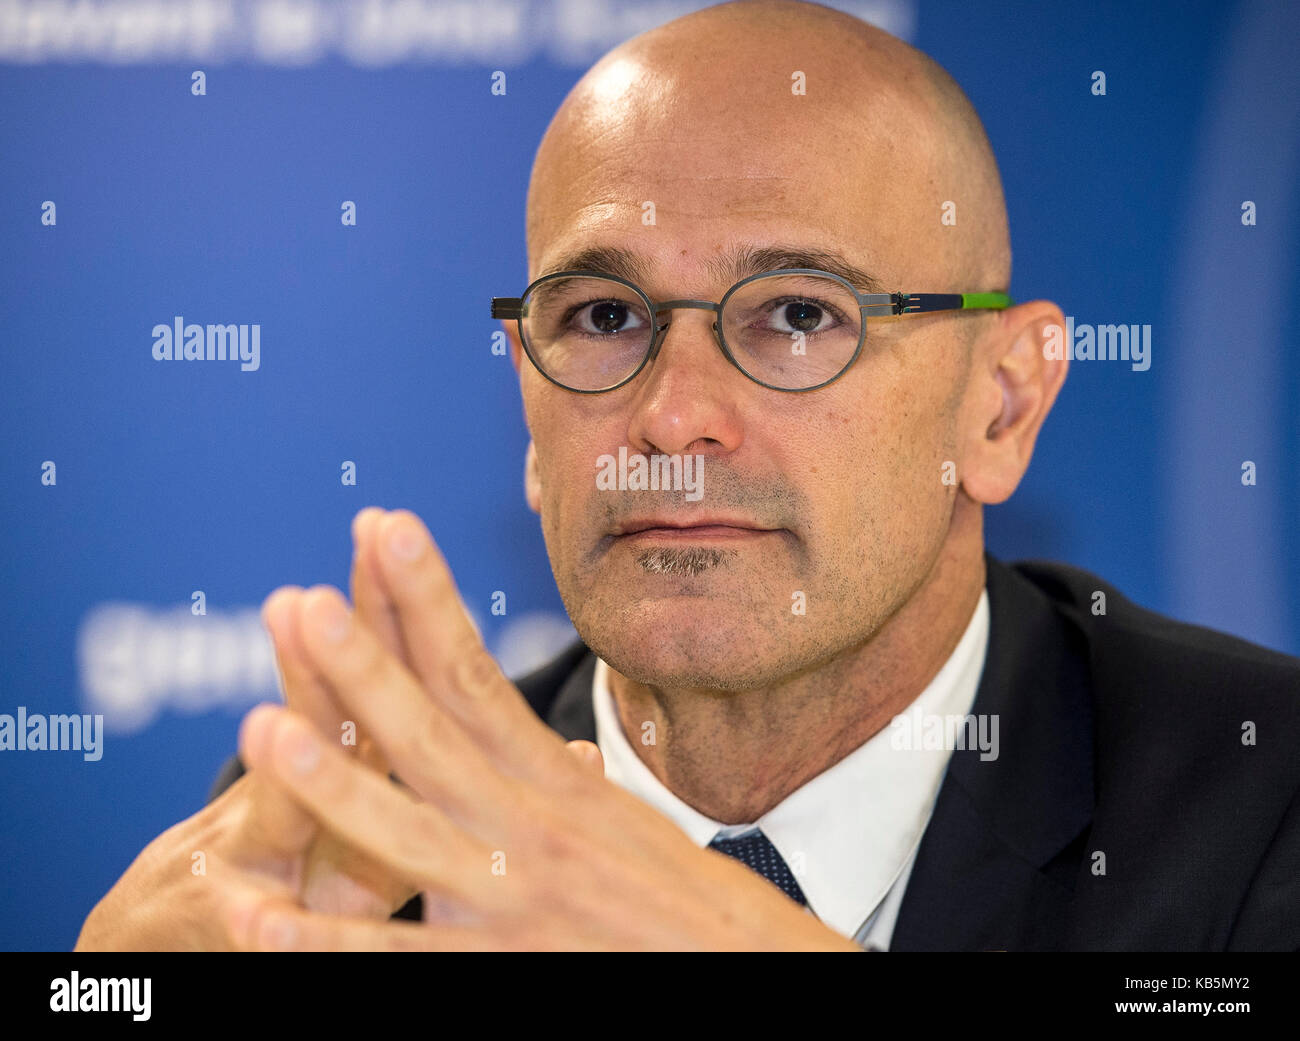 Brussels, Belgium. 28th Sep, 2017. Catalan Foreign Affairs chief Raul Romeva holds a news conference in Brussels, Belgium on 28.09.2017 The regional Government of Catalonia has set a referendum on Catalan independence for 1 October 2017. by Wiktor Dabkowski | usage worldwide Credit: dpa/Alamy Live News Stock Photo